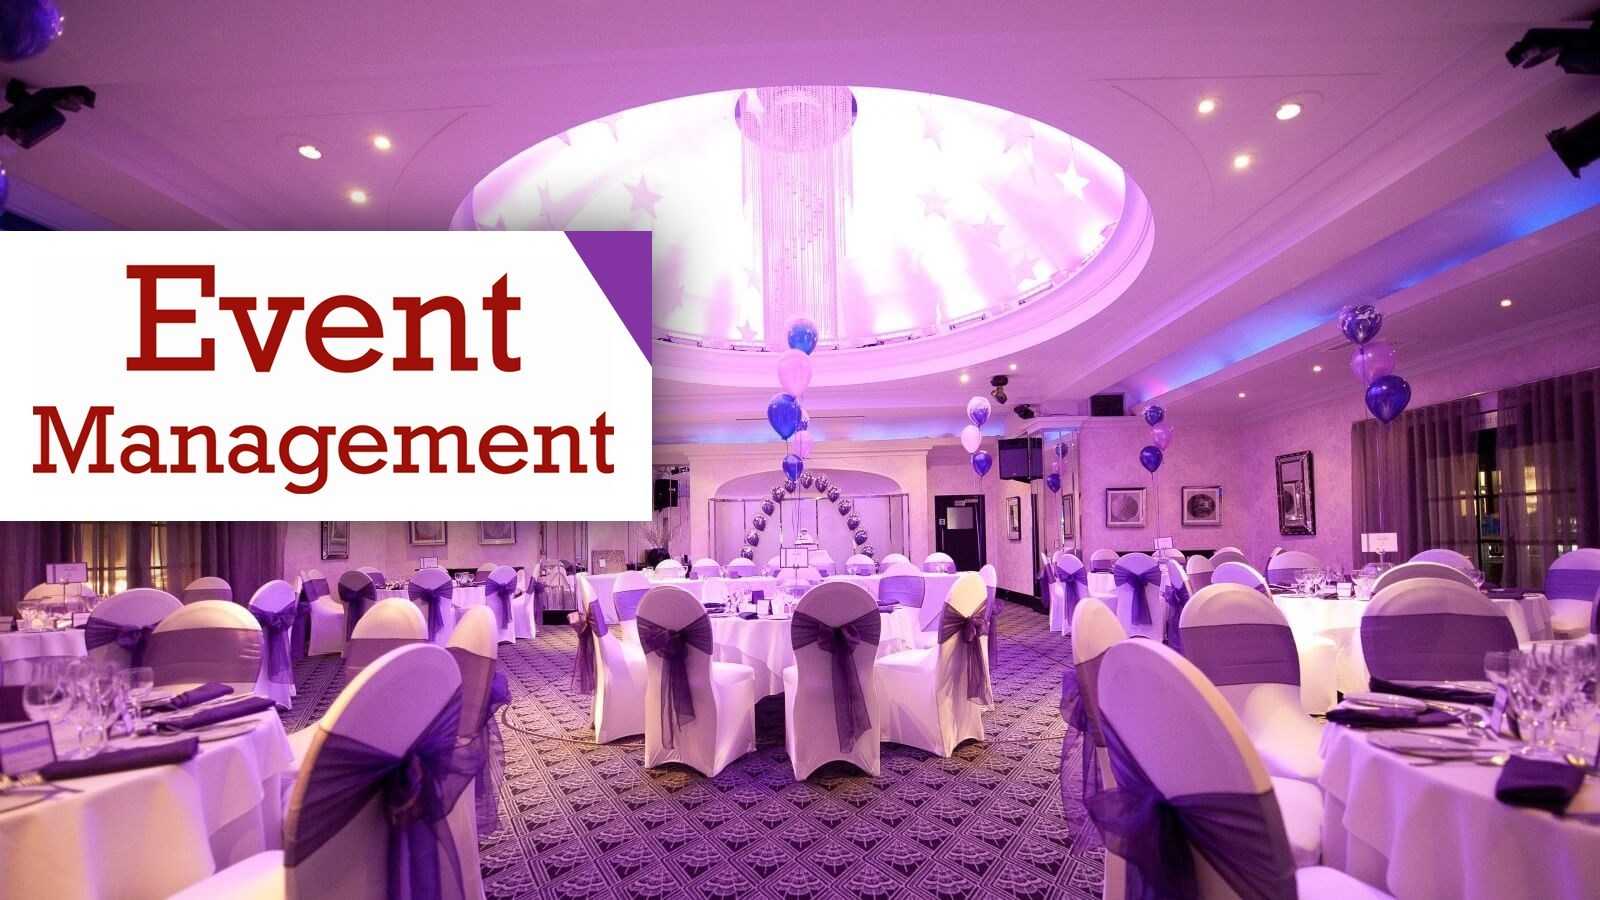 What does an event management company do?